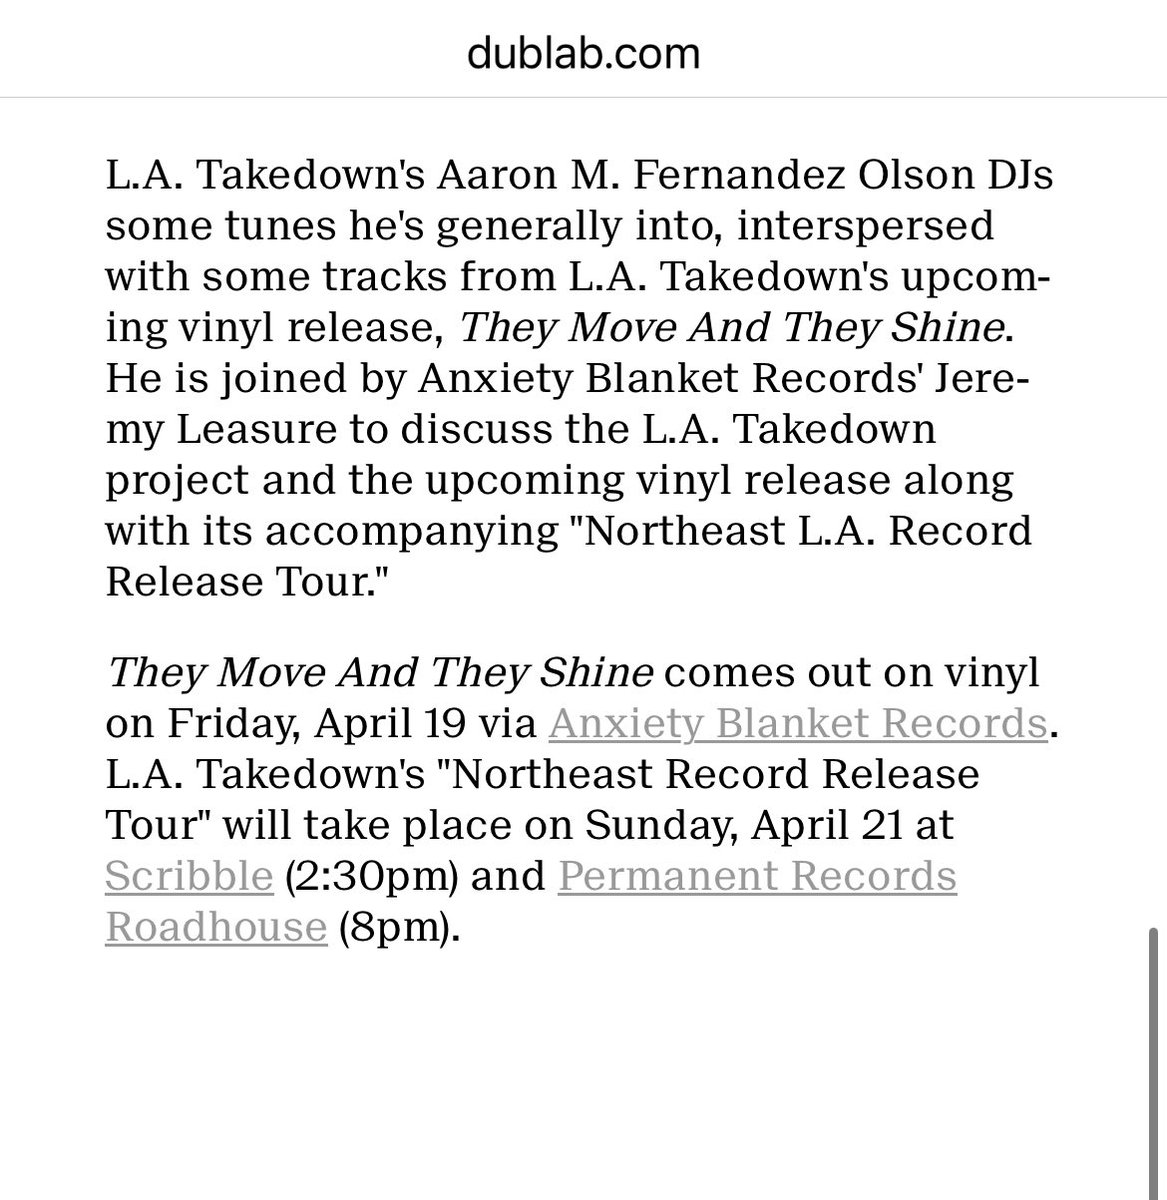 In anticipation of the vinyl release of L.A. Takedown‘s “They Move And They Shine” we have a guest session on @dublab today (3pm to 4pm)! ABR’s @jerleasure will be interviewing LATd mastermind Aaron M.F. olson about the new release! Link in thread